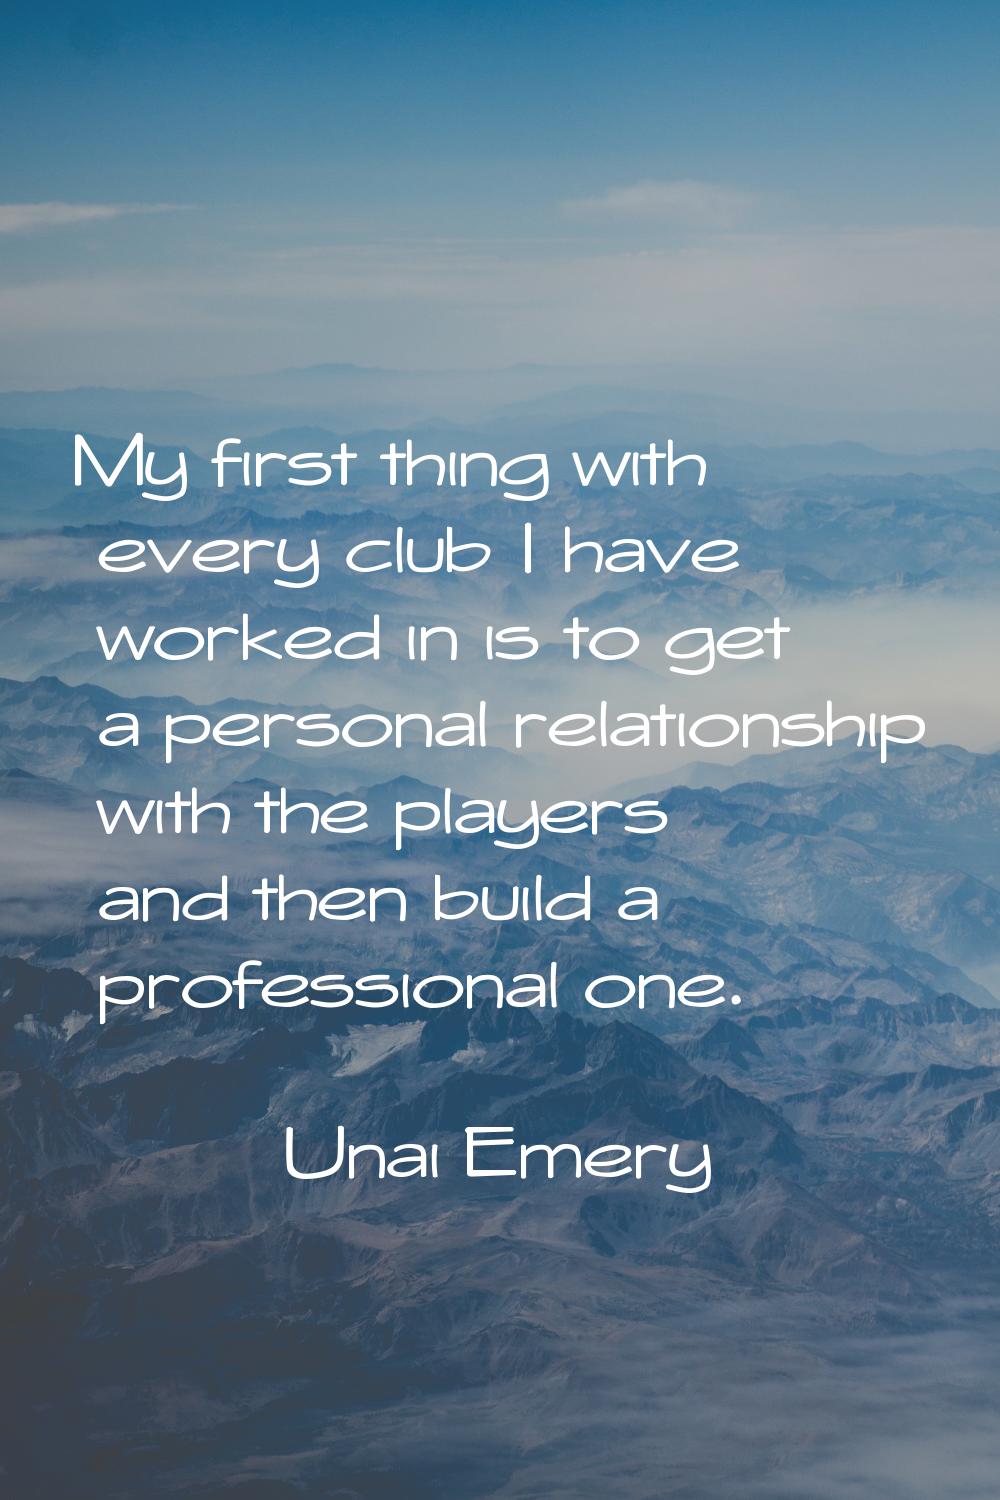 My first thing with every club I have worked in is to get a personal relationship with the players 